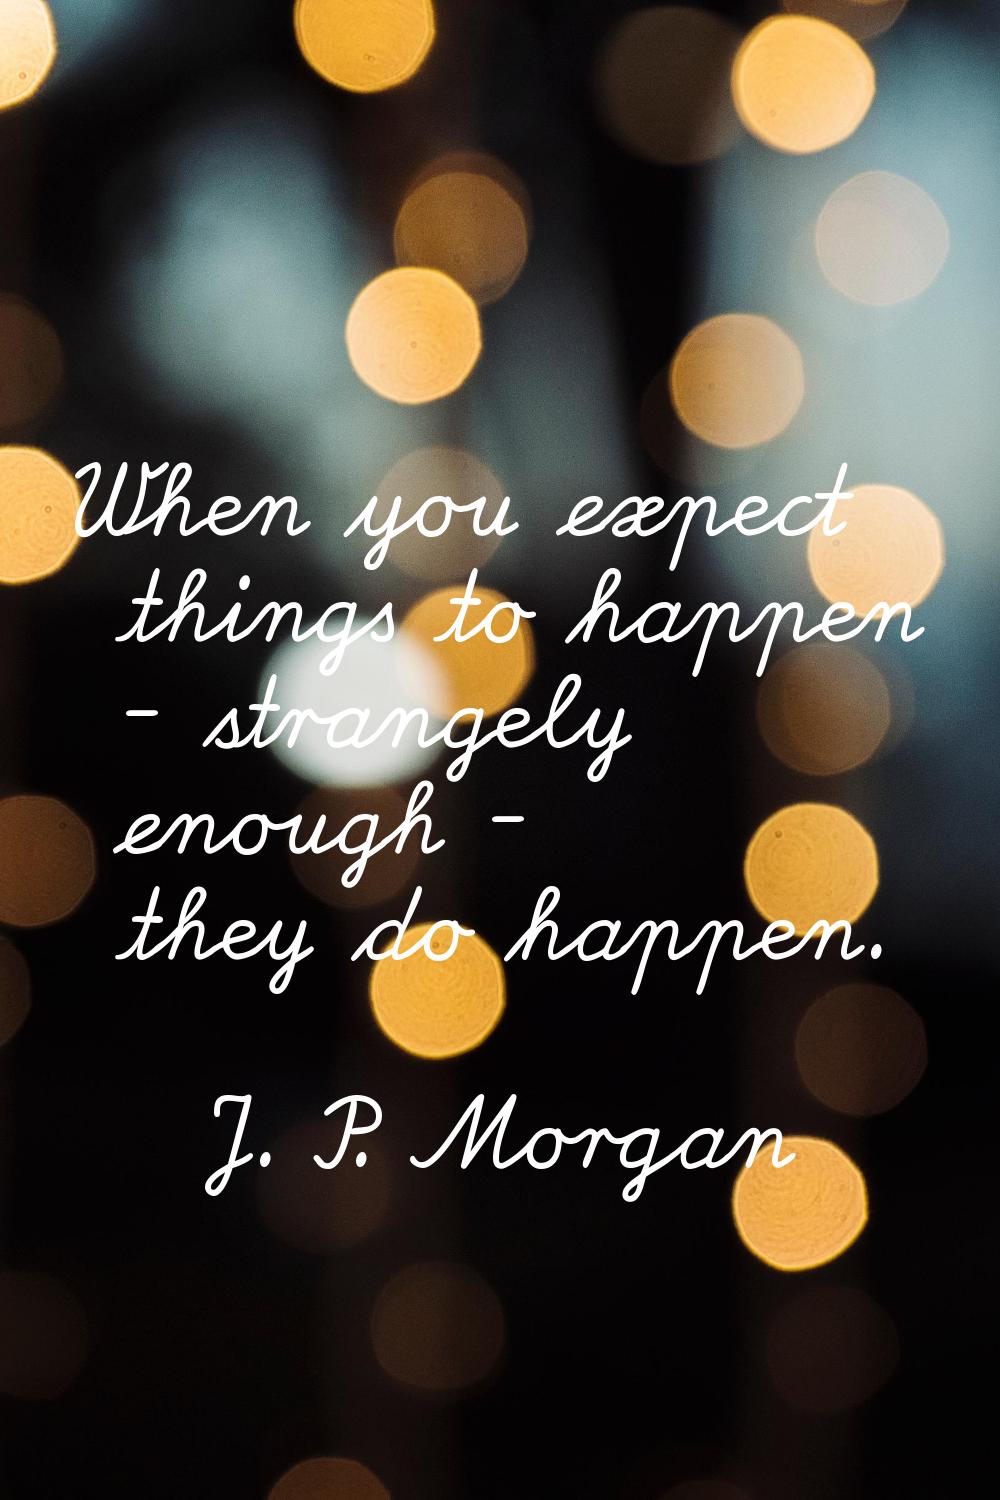 When you expect things to happen - strangely enough - they do happen.